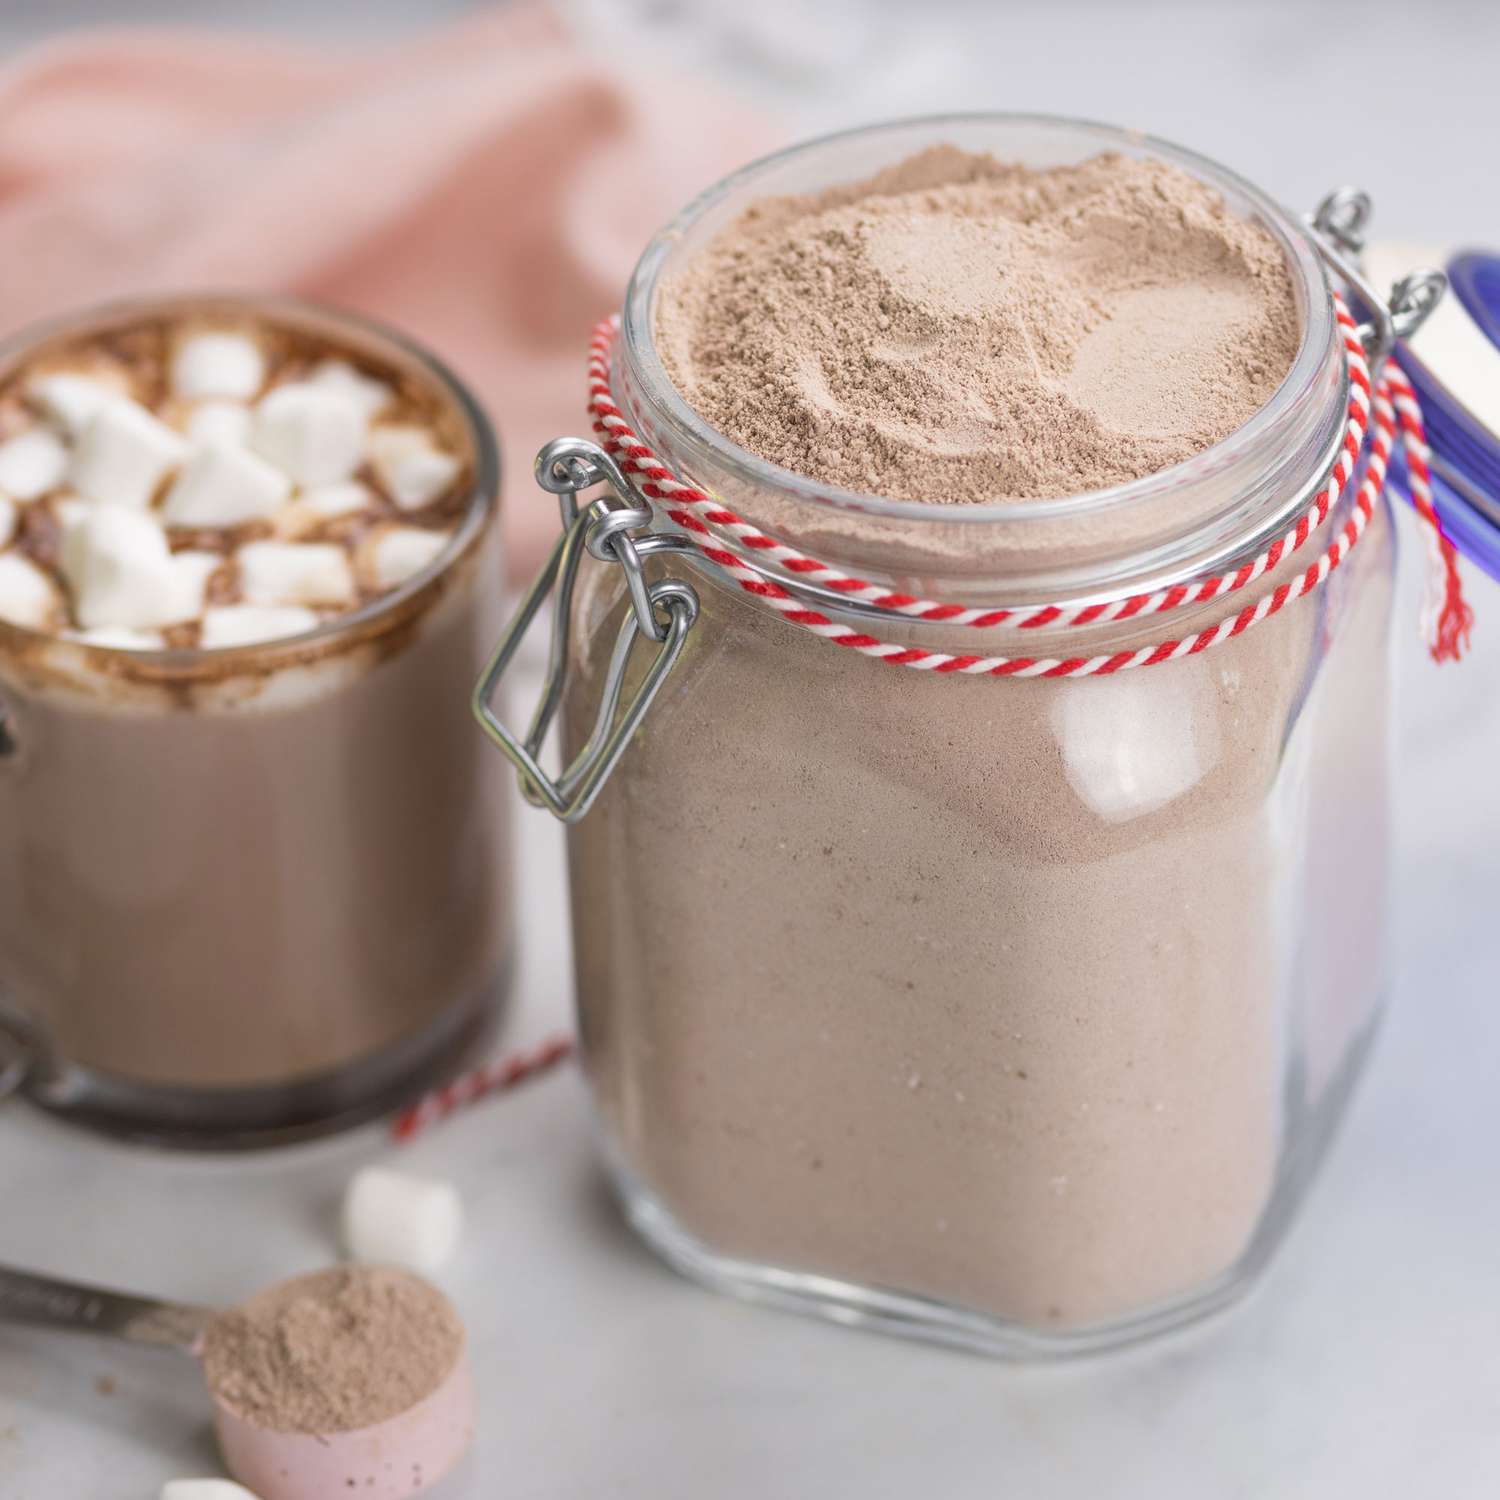 a low angle close up view of a jar of hot coco mix with a single cup of hot coco topped with marshmallows sitting next to it.